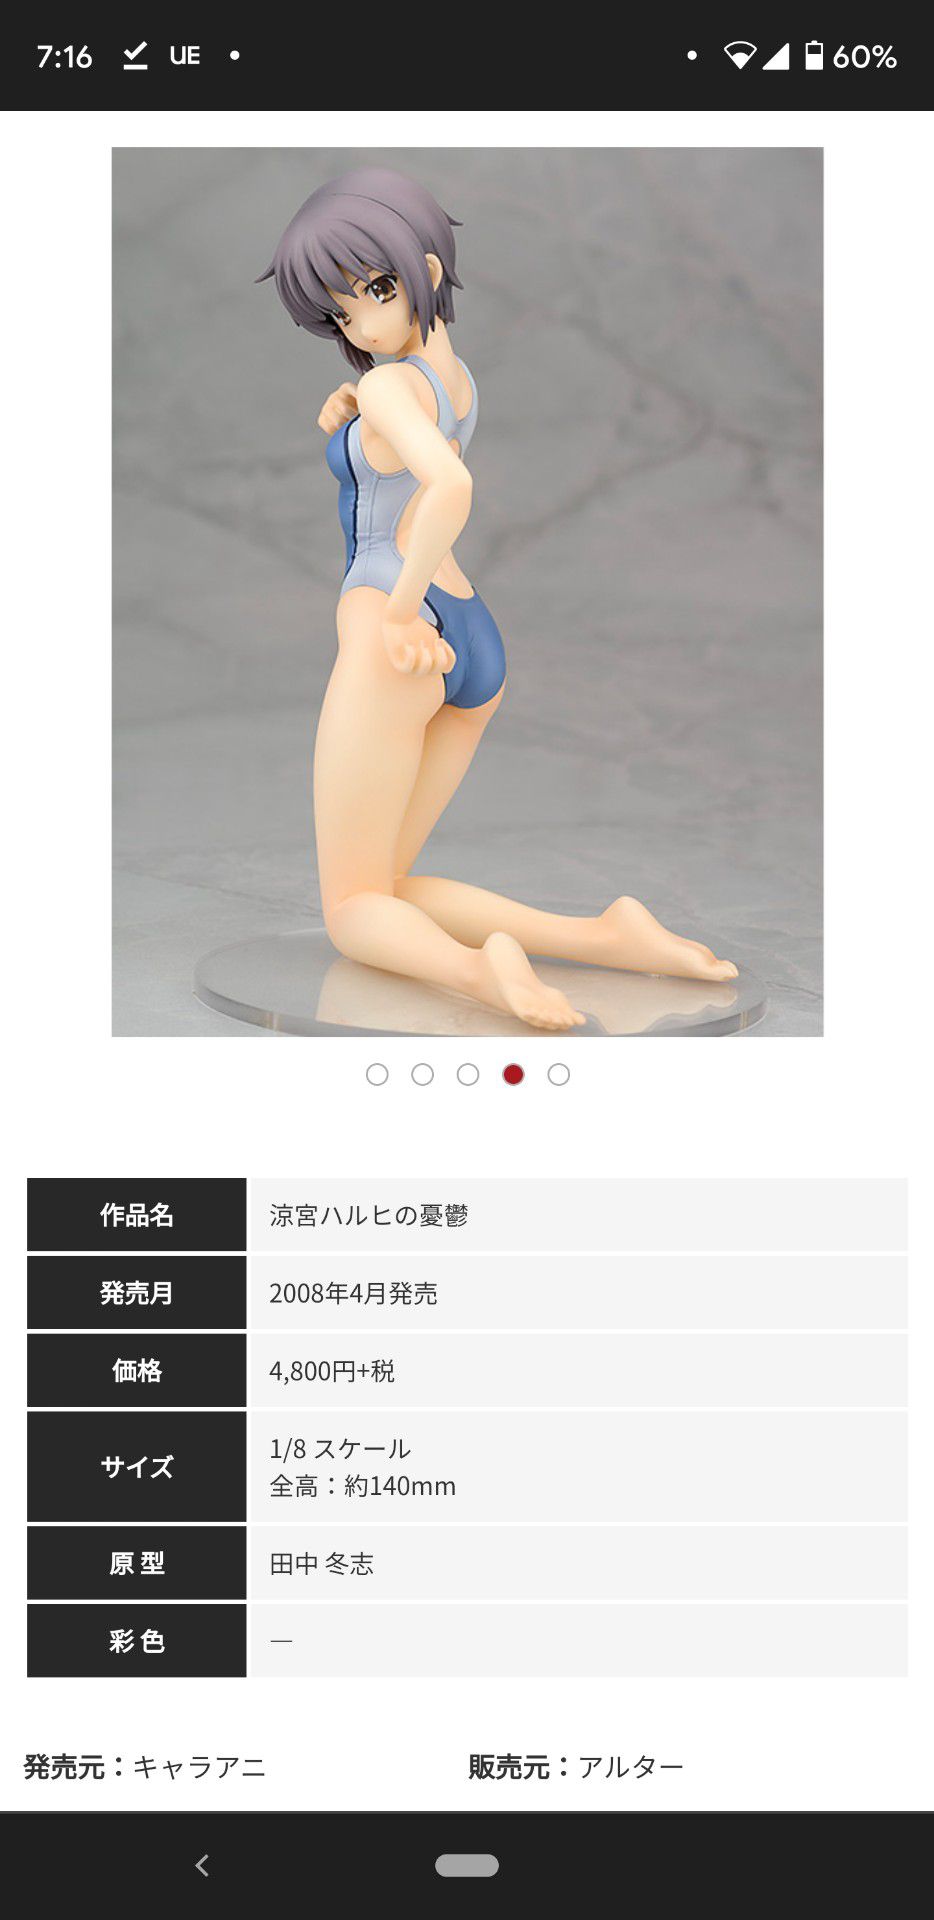 【Image】Bomber Girl's new female gaki figure, fleshed out is too real and etched 38